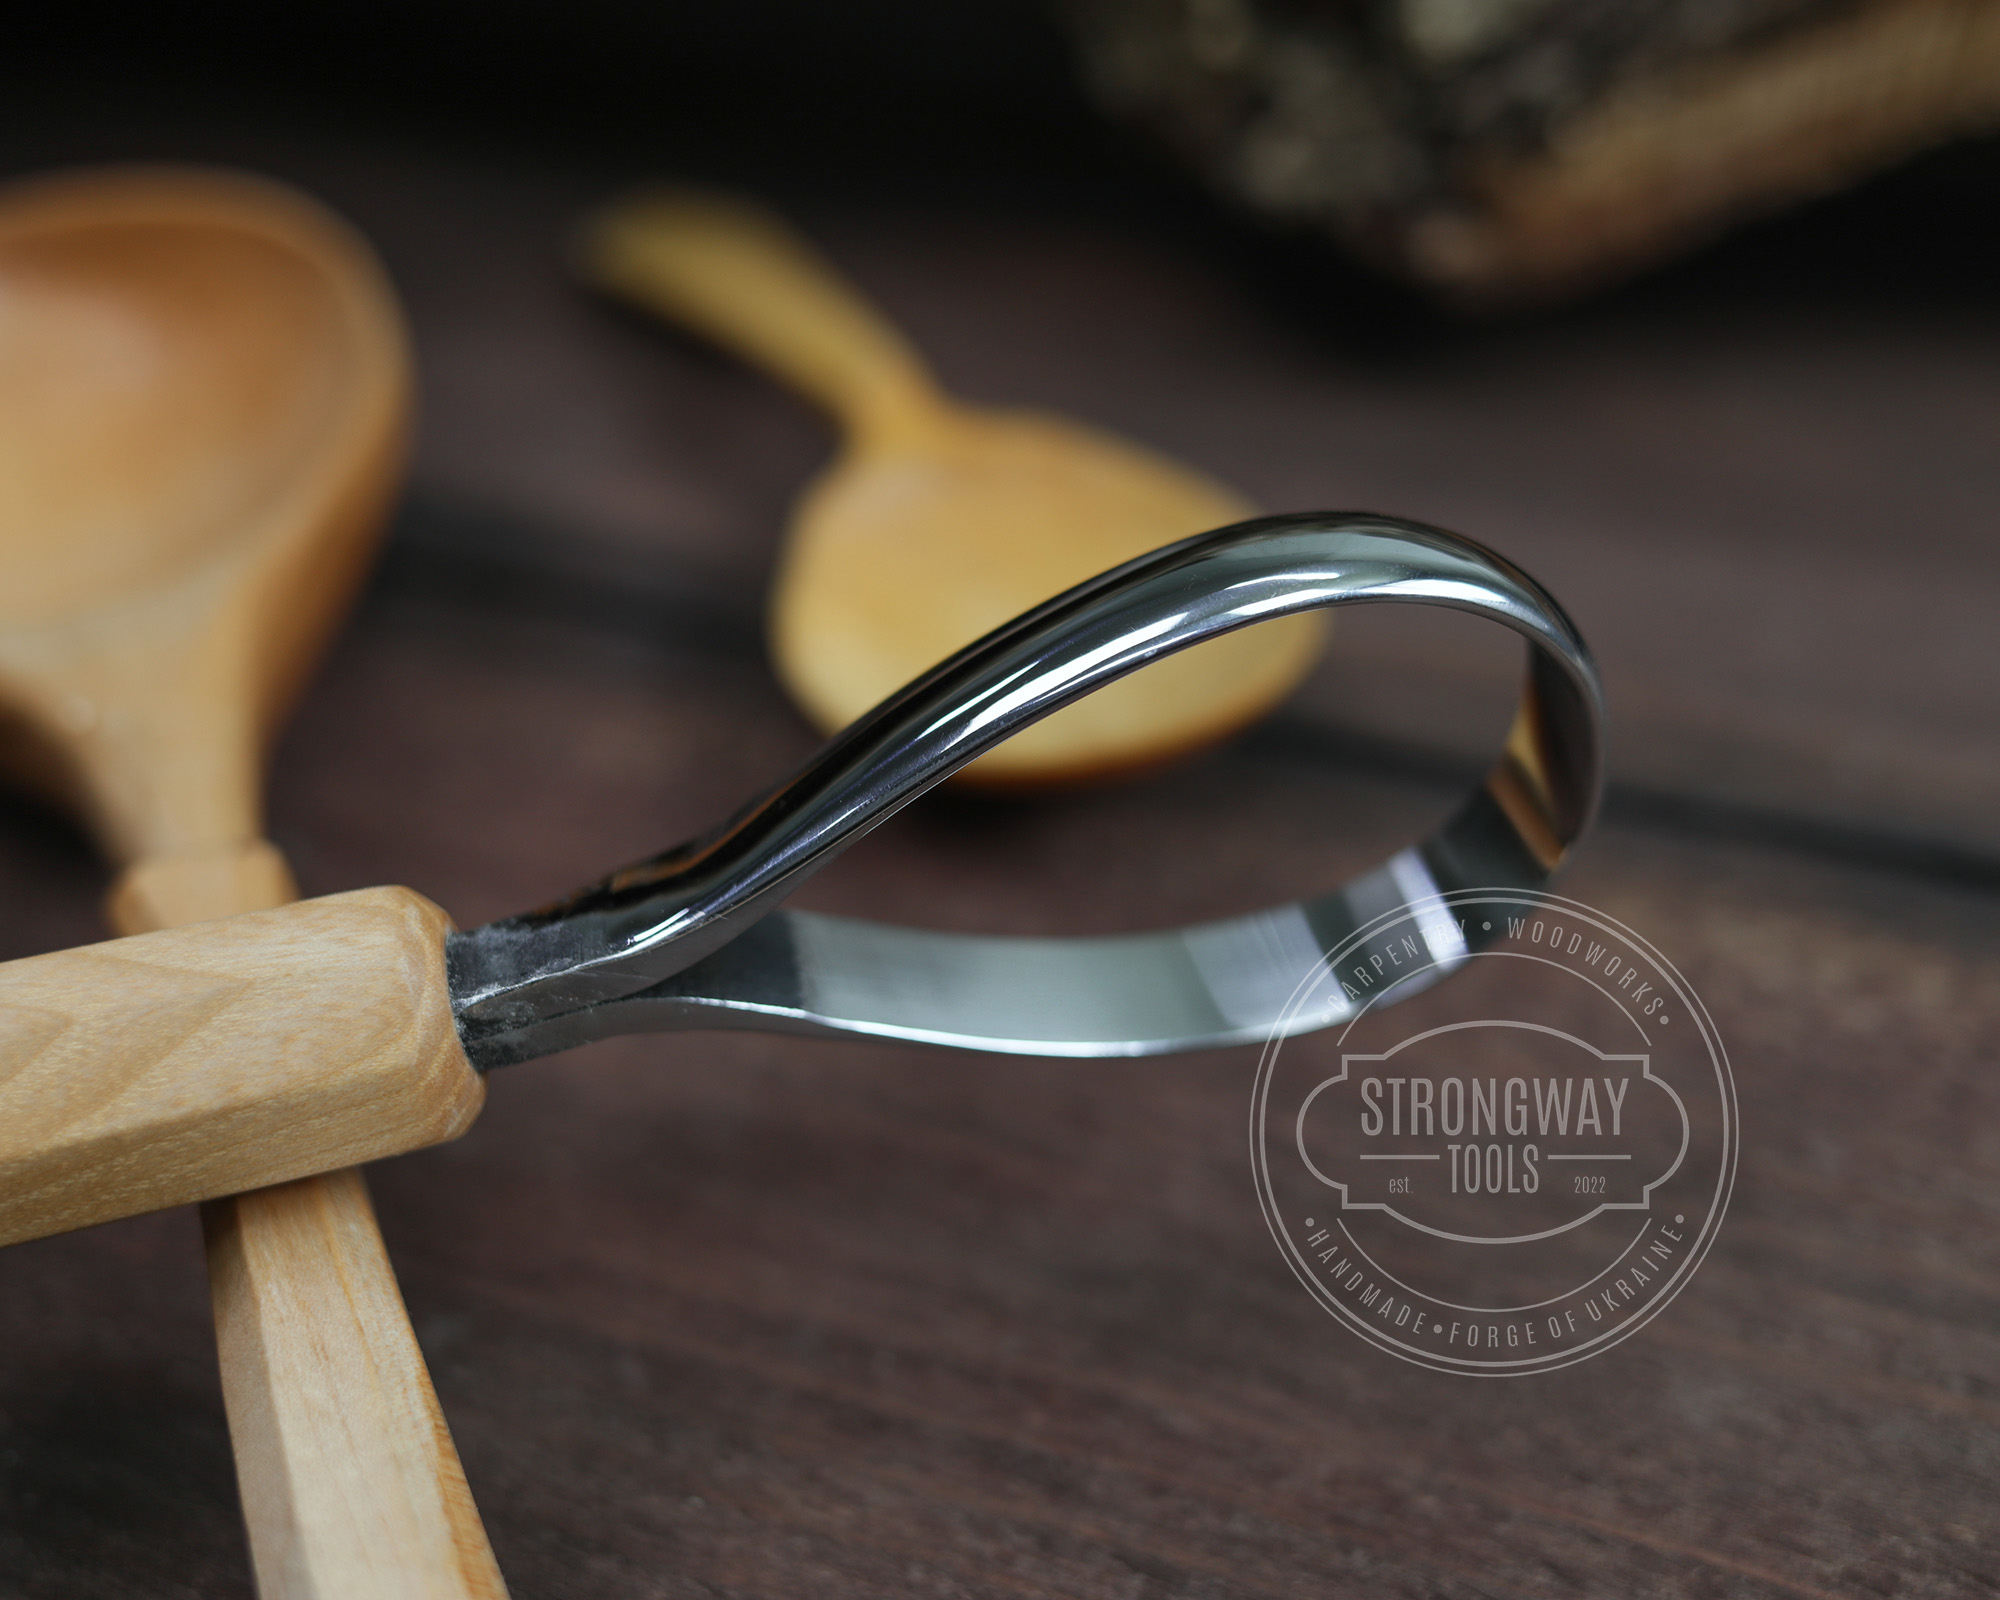 Spoon carving knife, Right-handed, Tight curve longer handle, Whittling  knife, Fresh wood carving, Handforged, Handcarving - The Spoon Crank